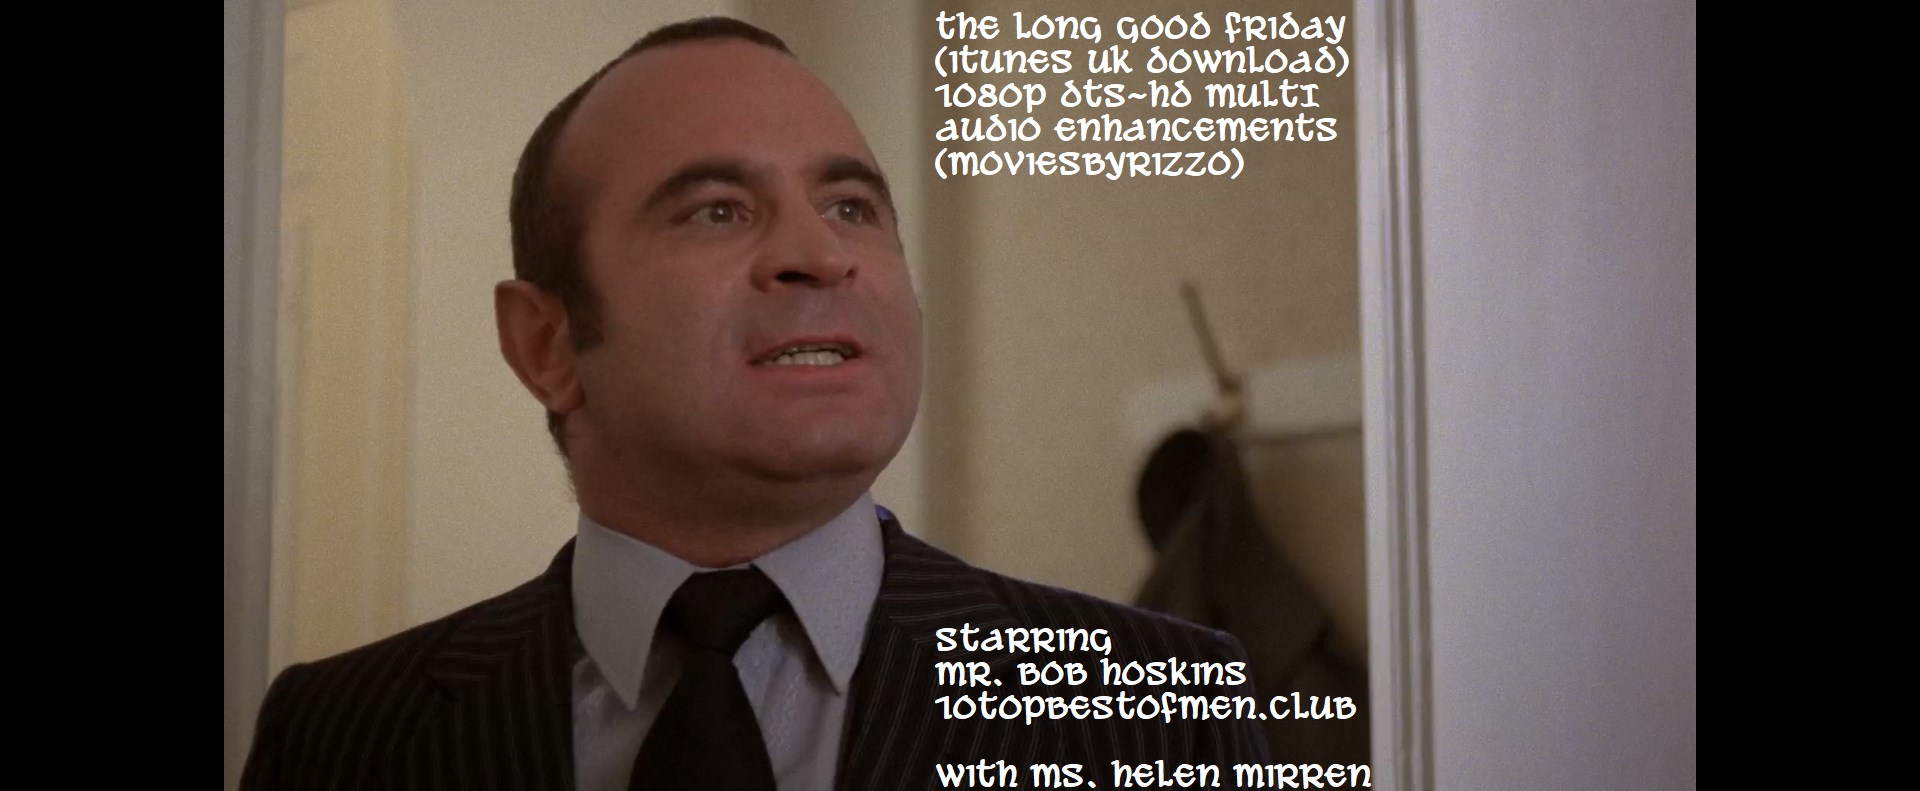 The Long Good Friday (1980) (itunes vers) 1080p DTS-HD MULTI (moviesbyrizzo)